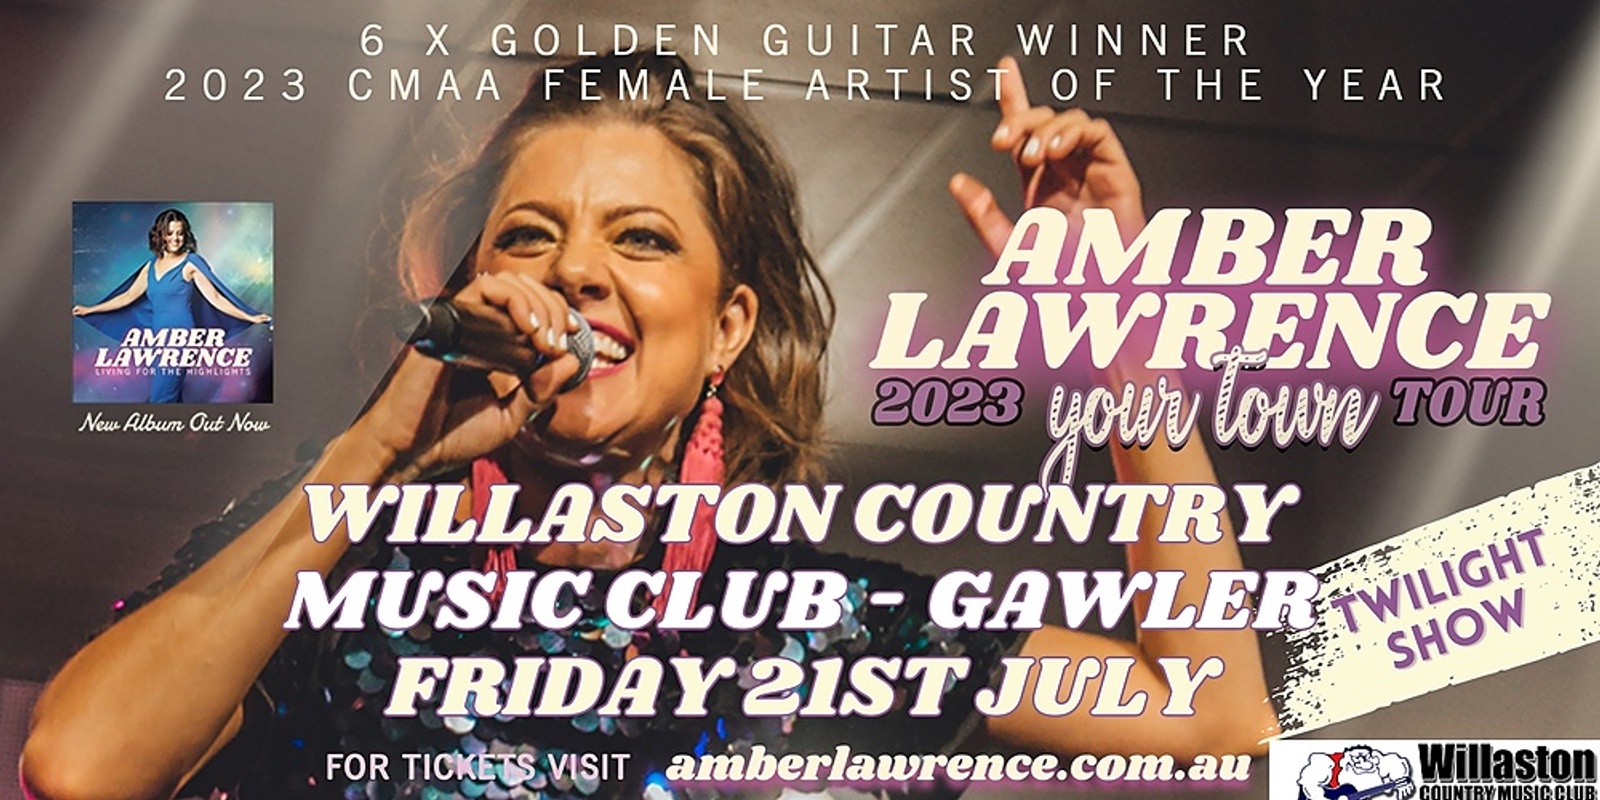 Amber Lawrence - Your Town Tour - Willaston Country Music Club - Gawler